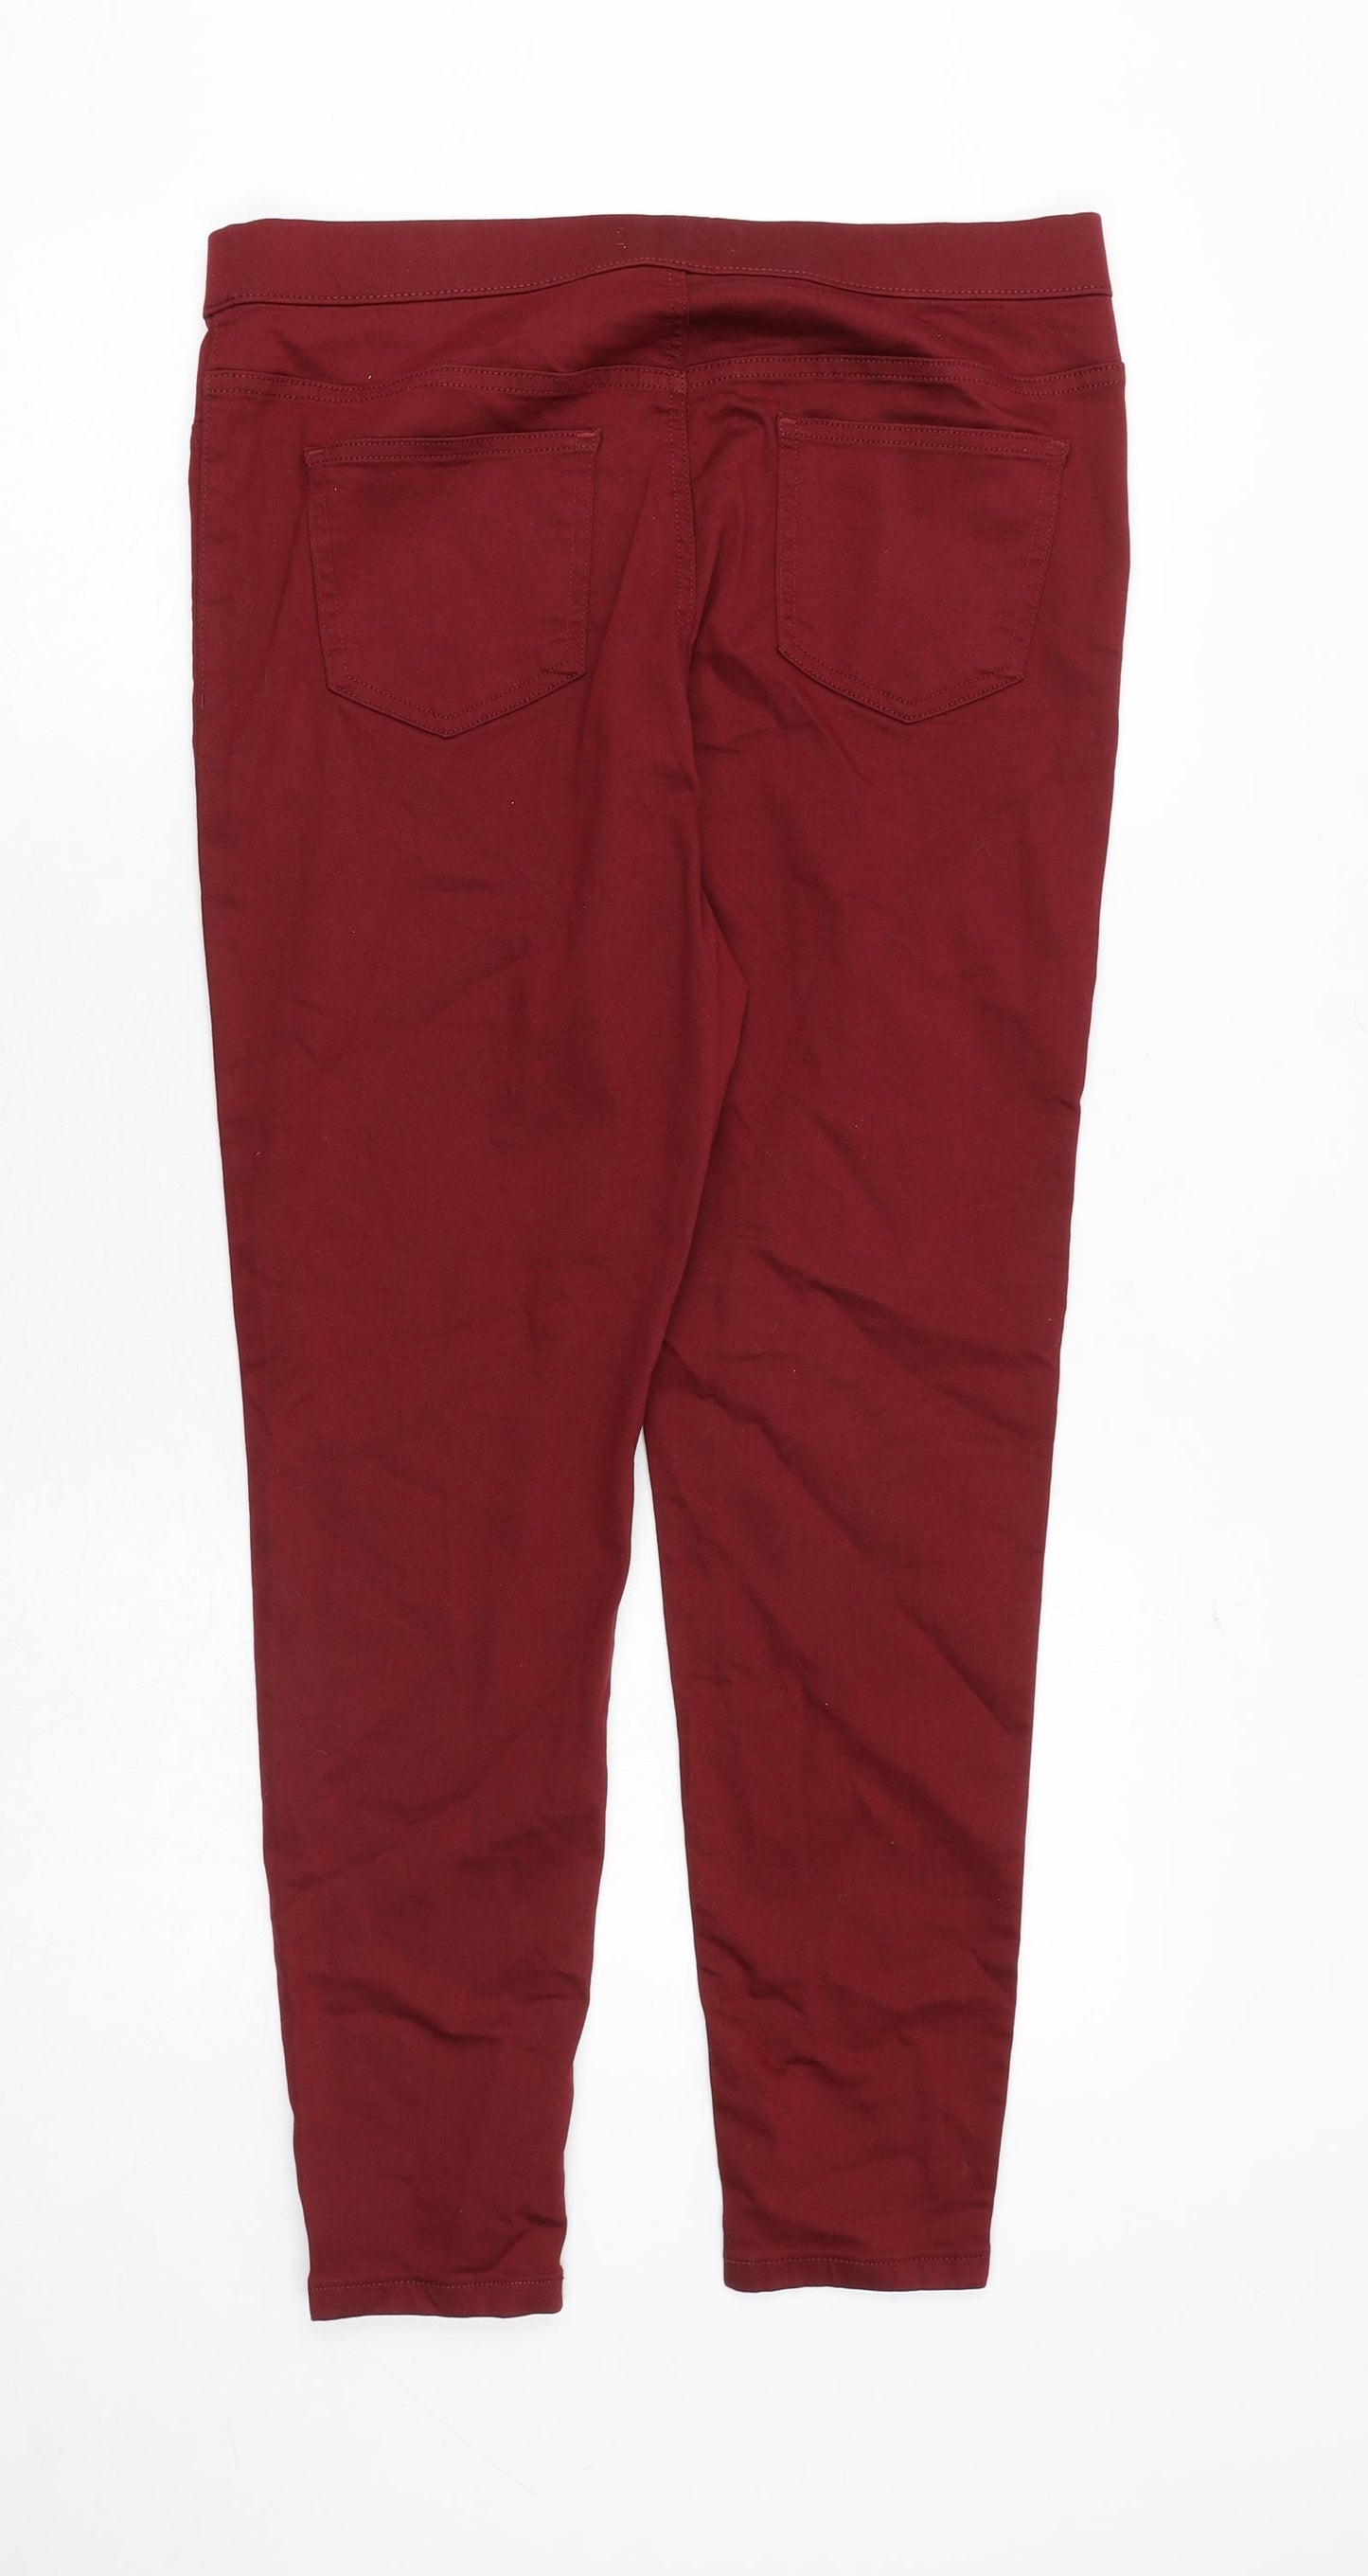 Marks and Spencer Womens Red Cotton Jegging Jeans Size 16 Regular